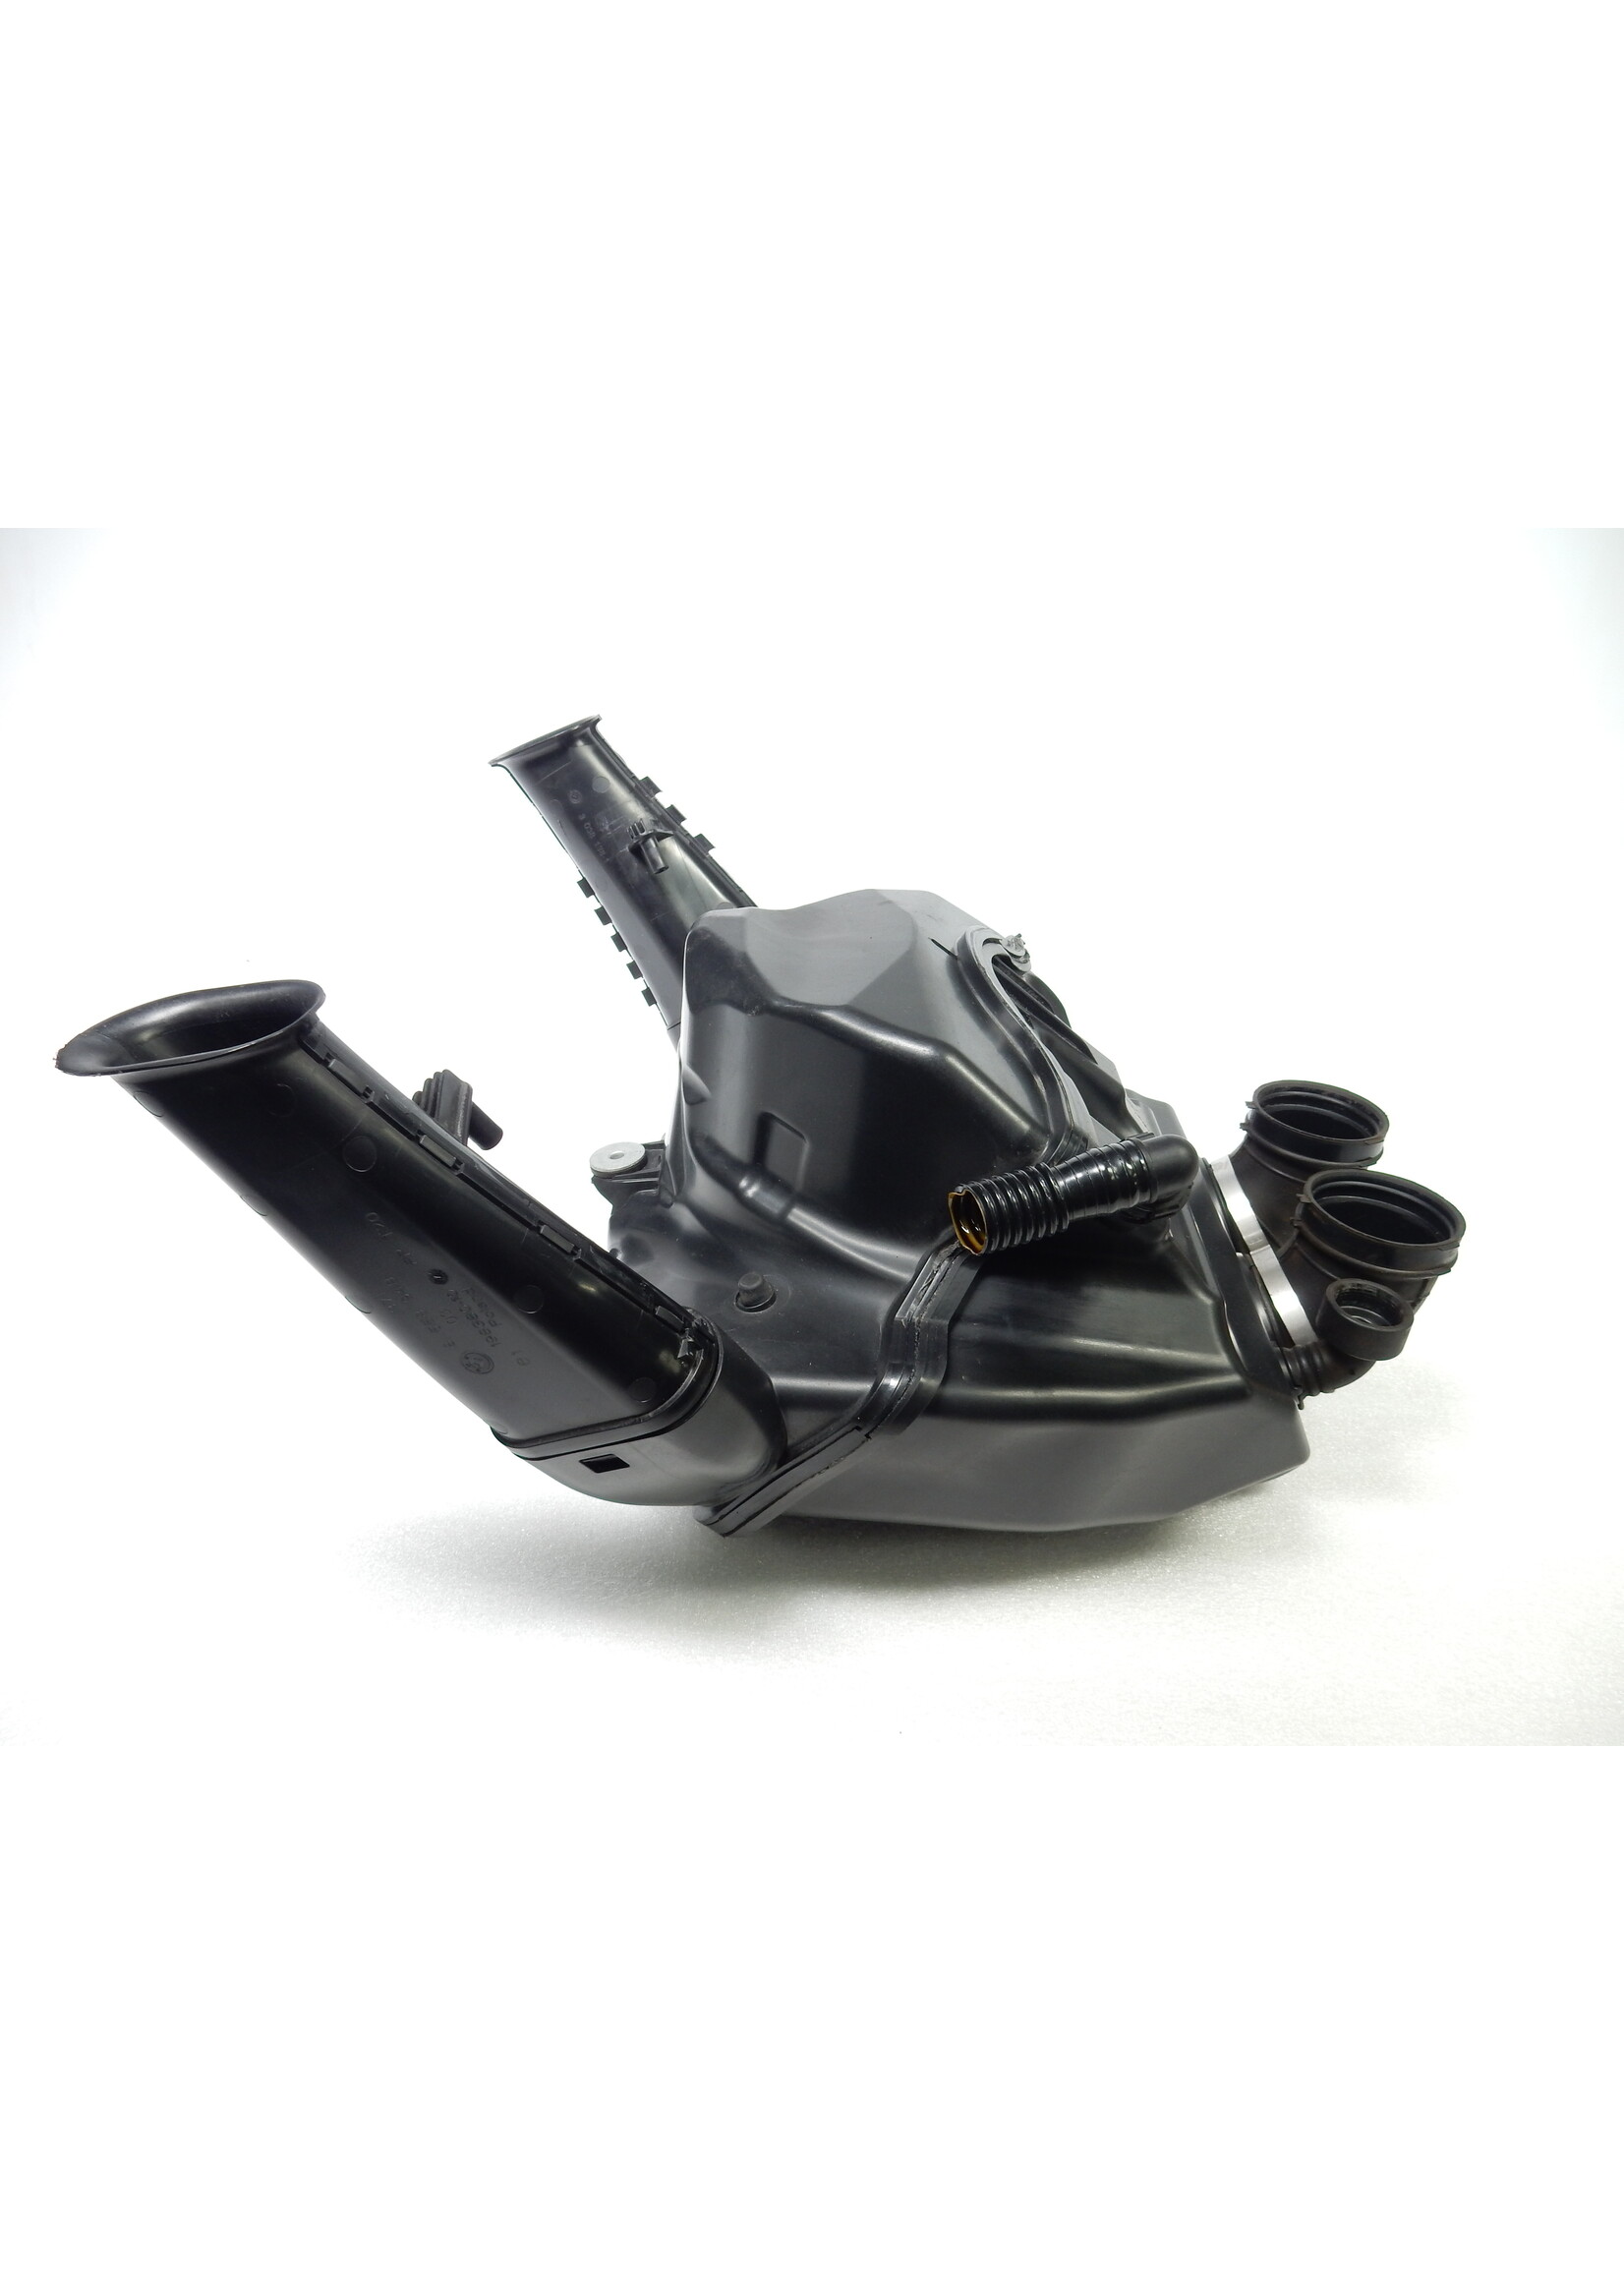 BMW BMW F 750 GS Intake silencer / Air cleaner / Intake snorkel, left / right / 13718558918 / 13728561572 / 13718558947 / 13718558948